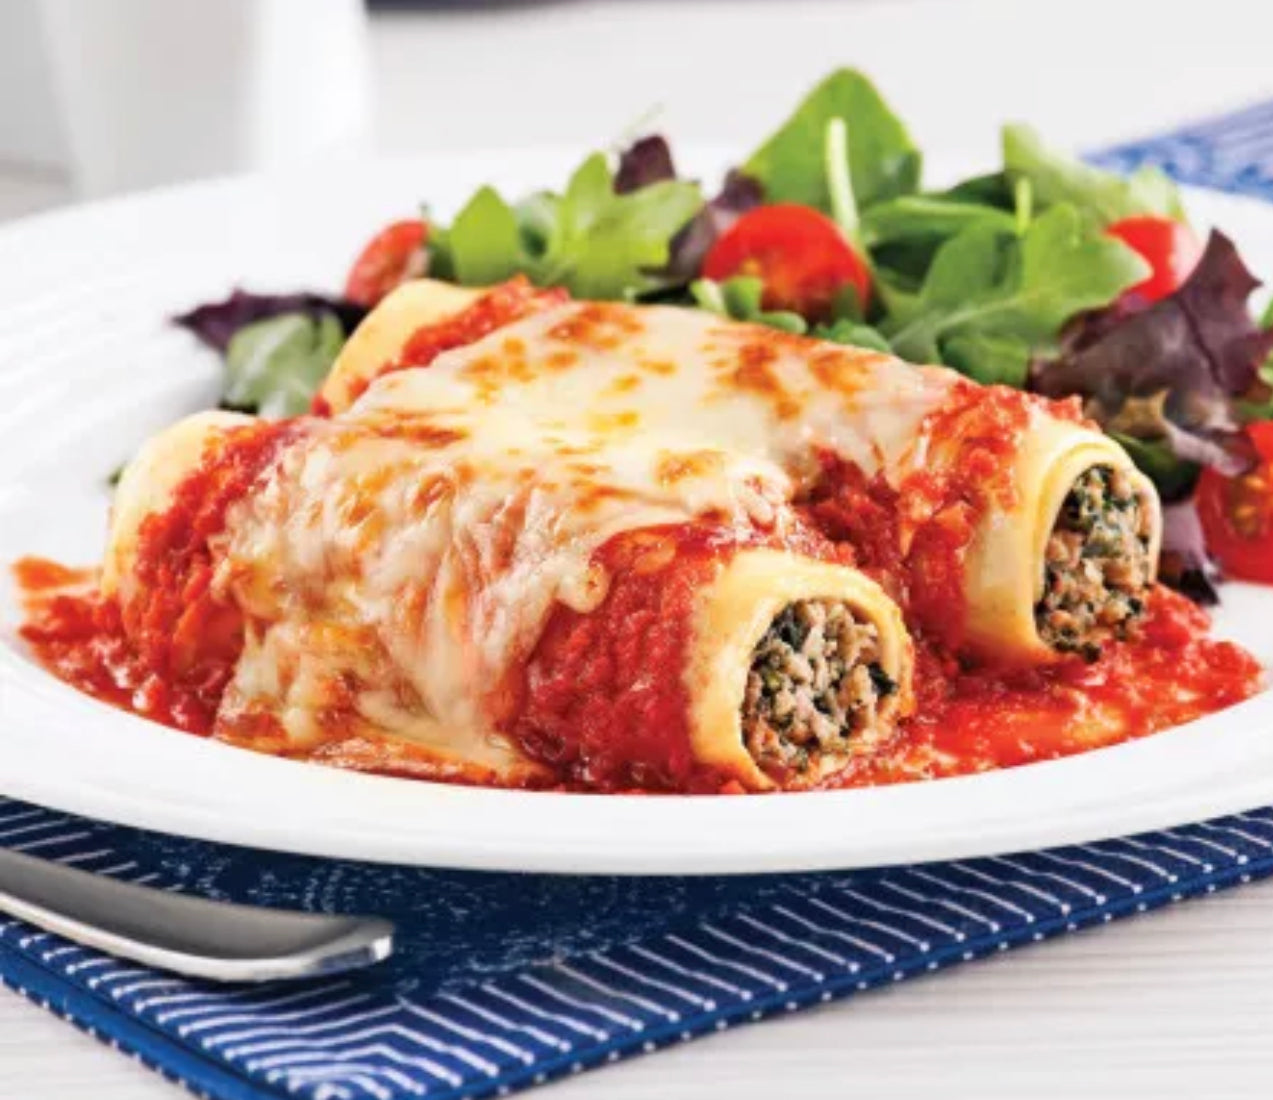 French beef cannelloni - 750g